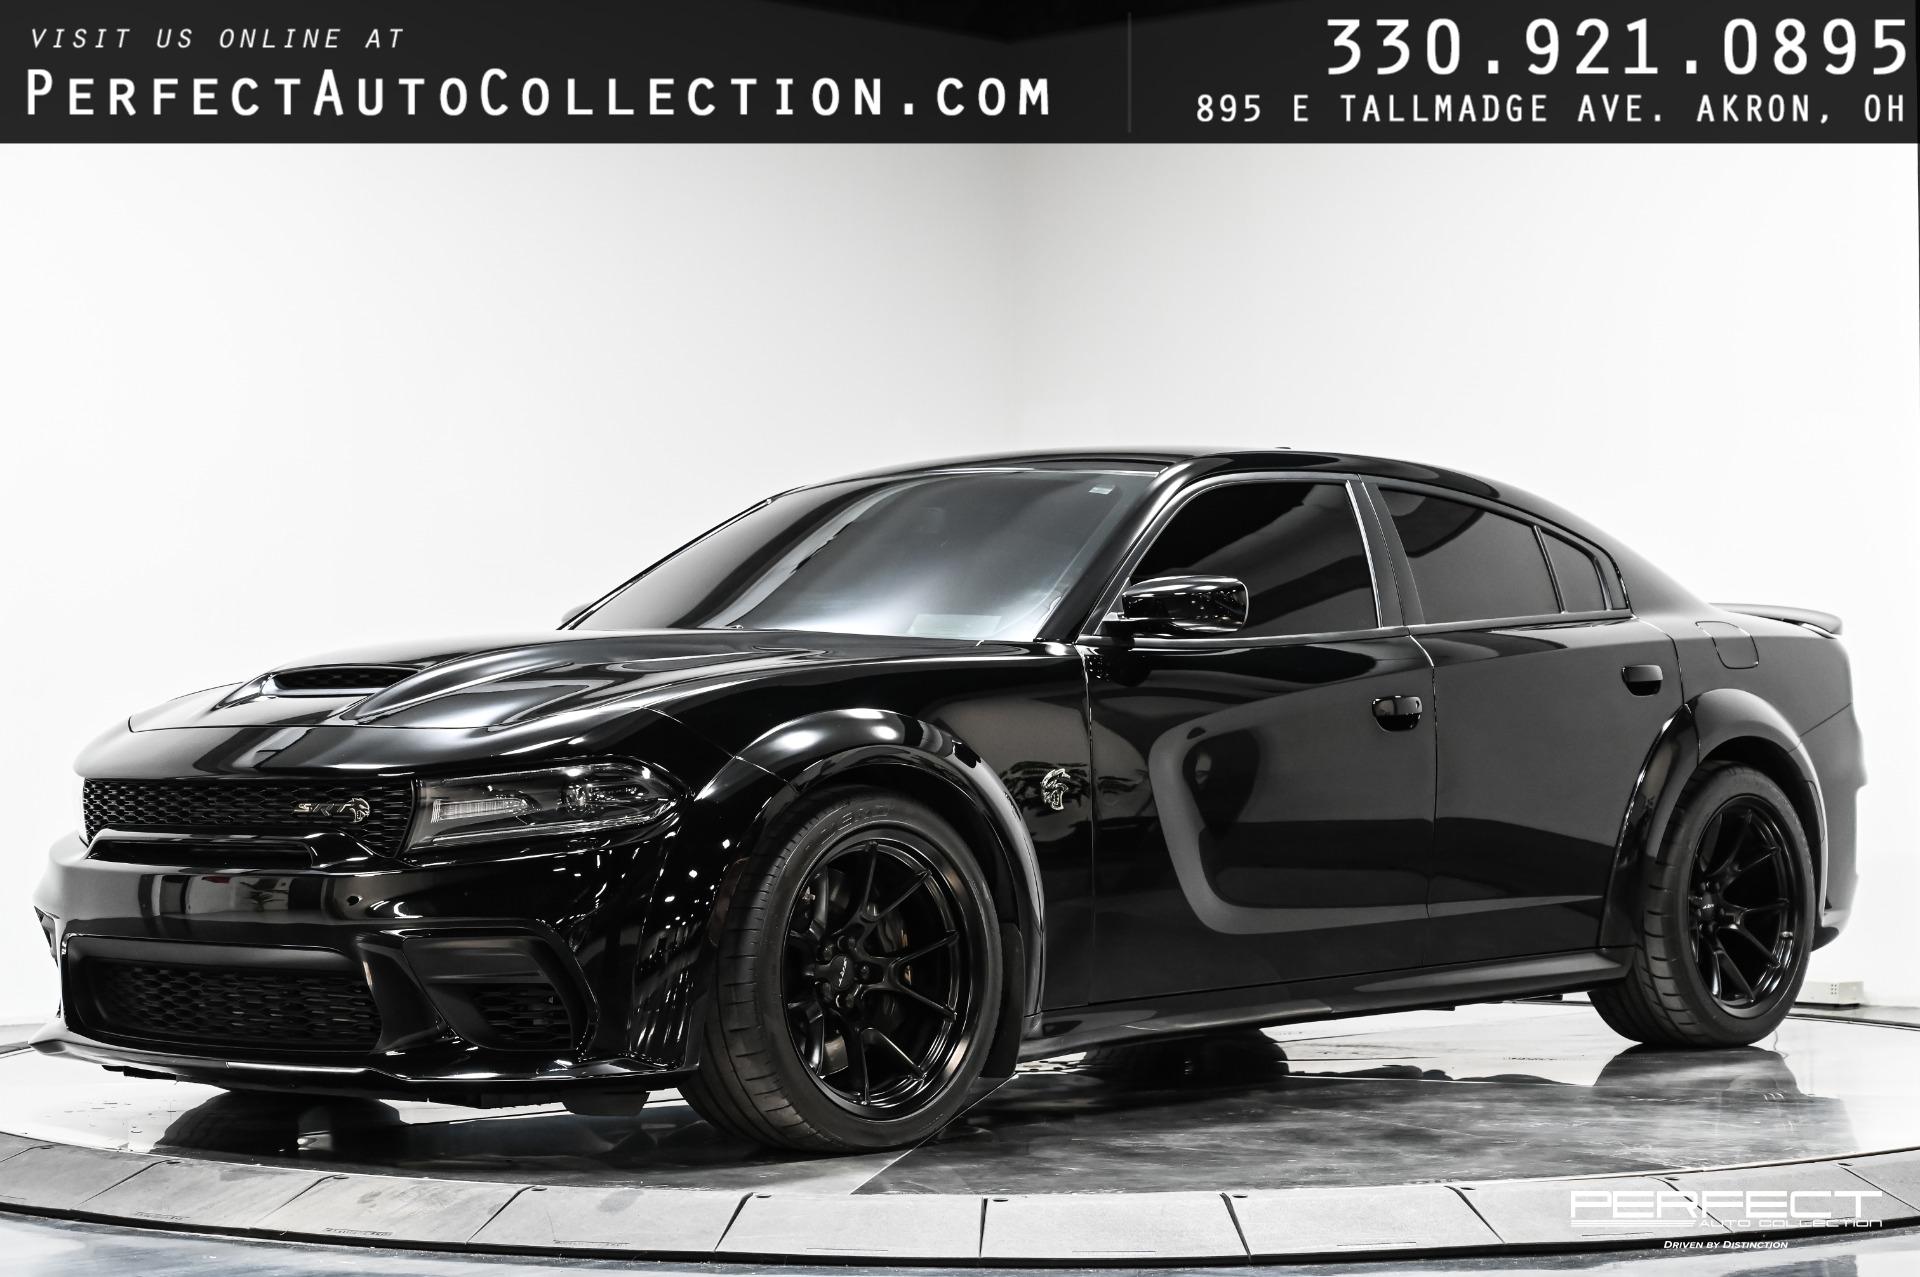 https://www.perfectautocollection.com/imagetag/2036/main/l/Used-2021-Dodge-Charger-SRT-Hellcat-Widebody-1660251295.jpg